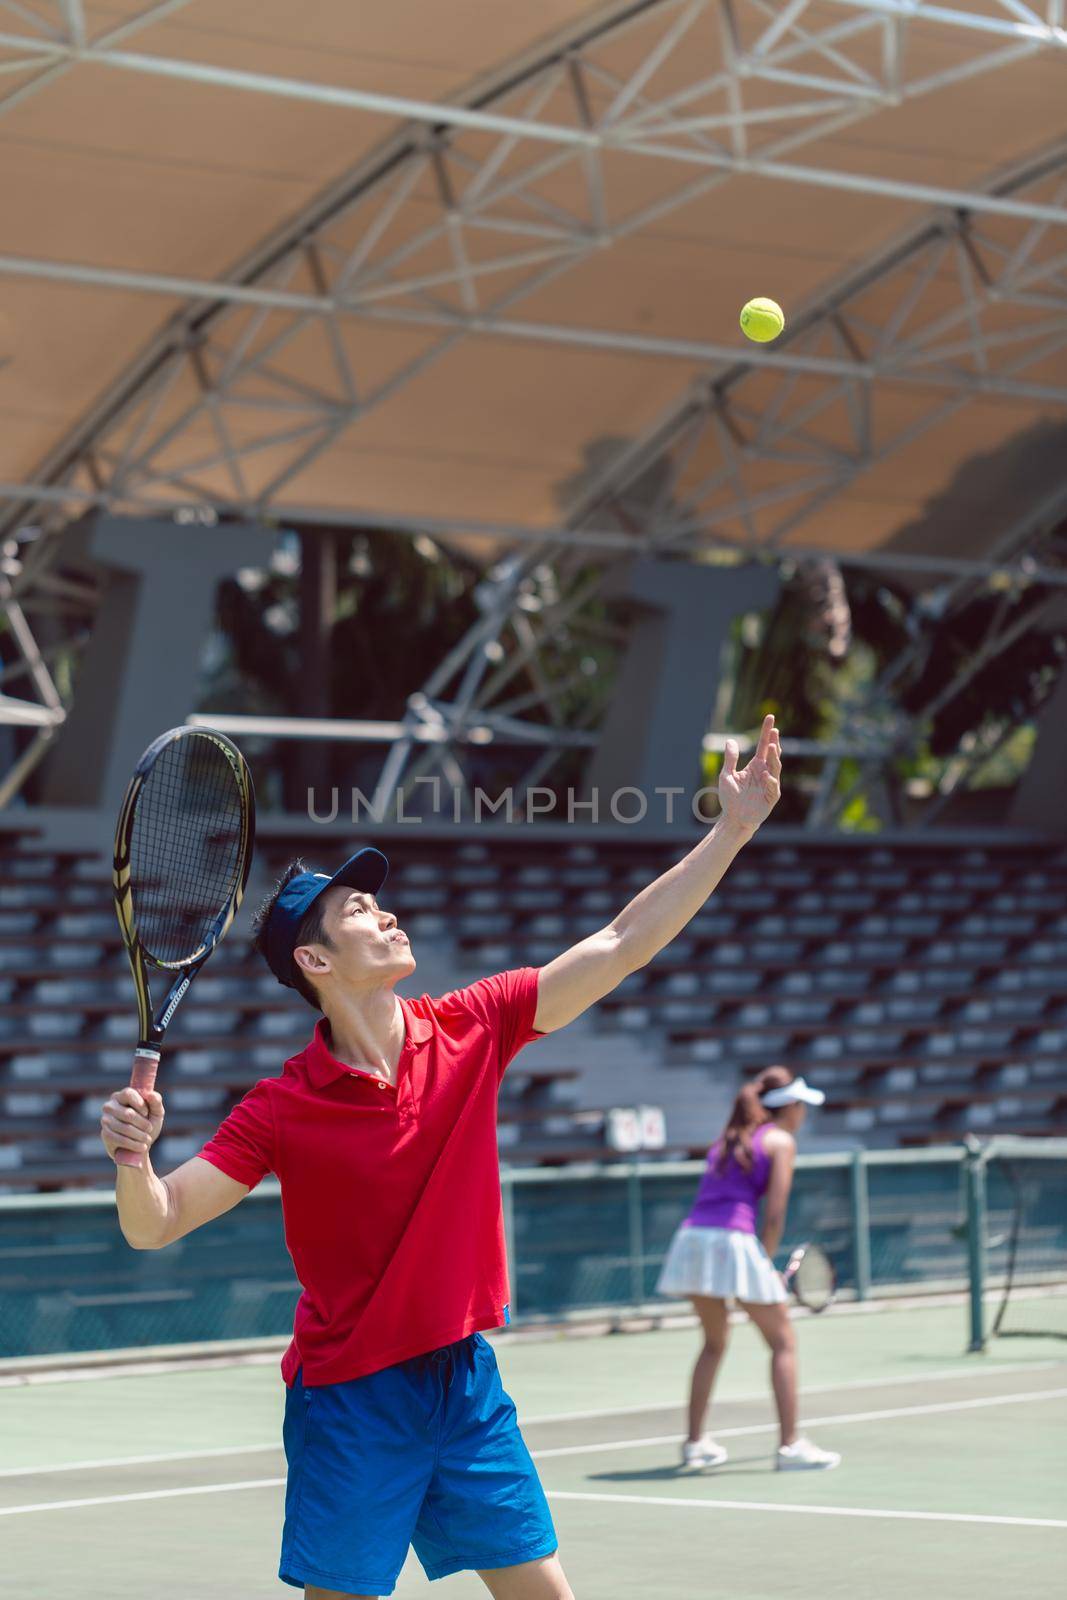 Asian tennis player ready to serve at the beginning of a doubles match by Kzenon